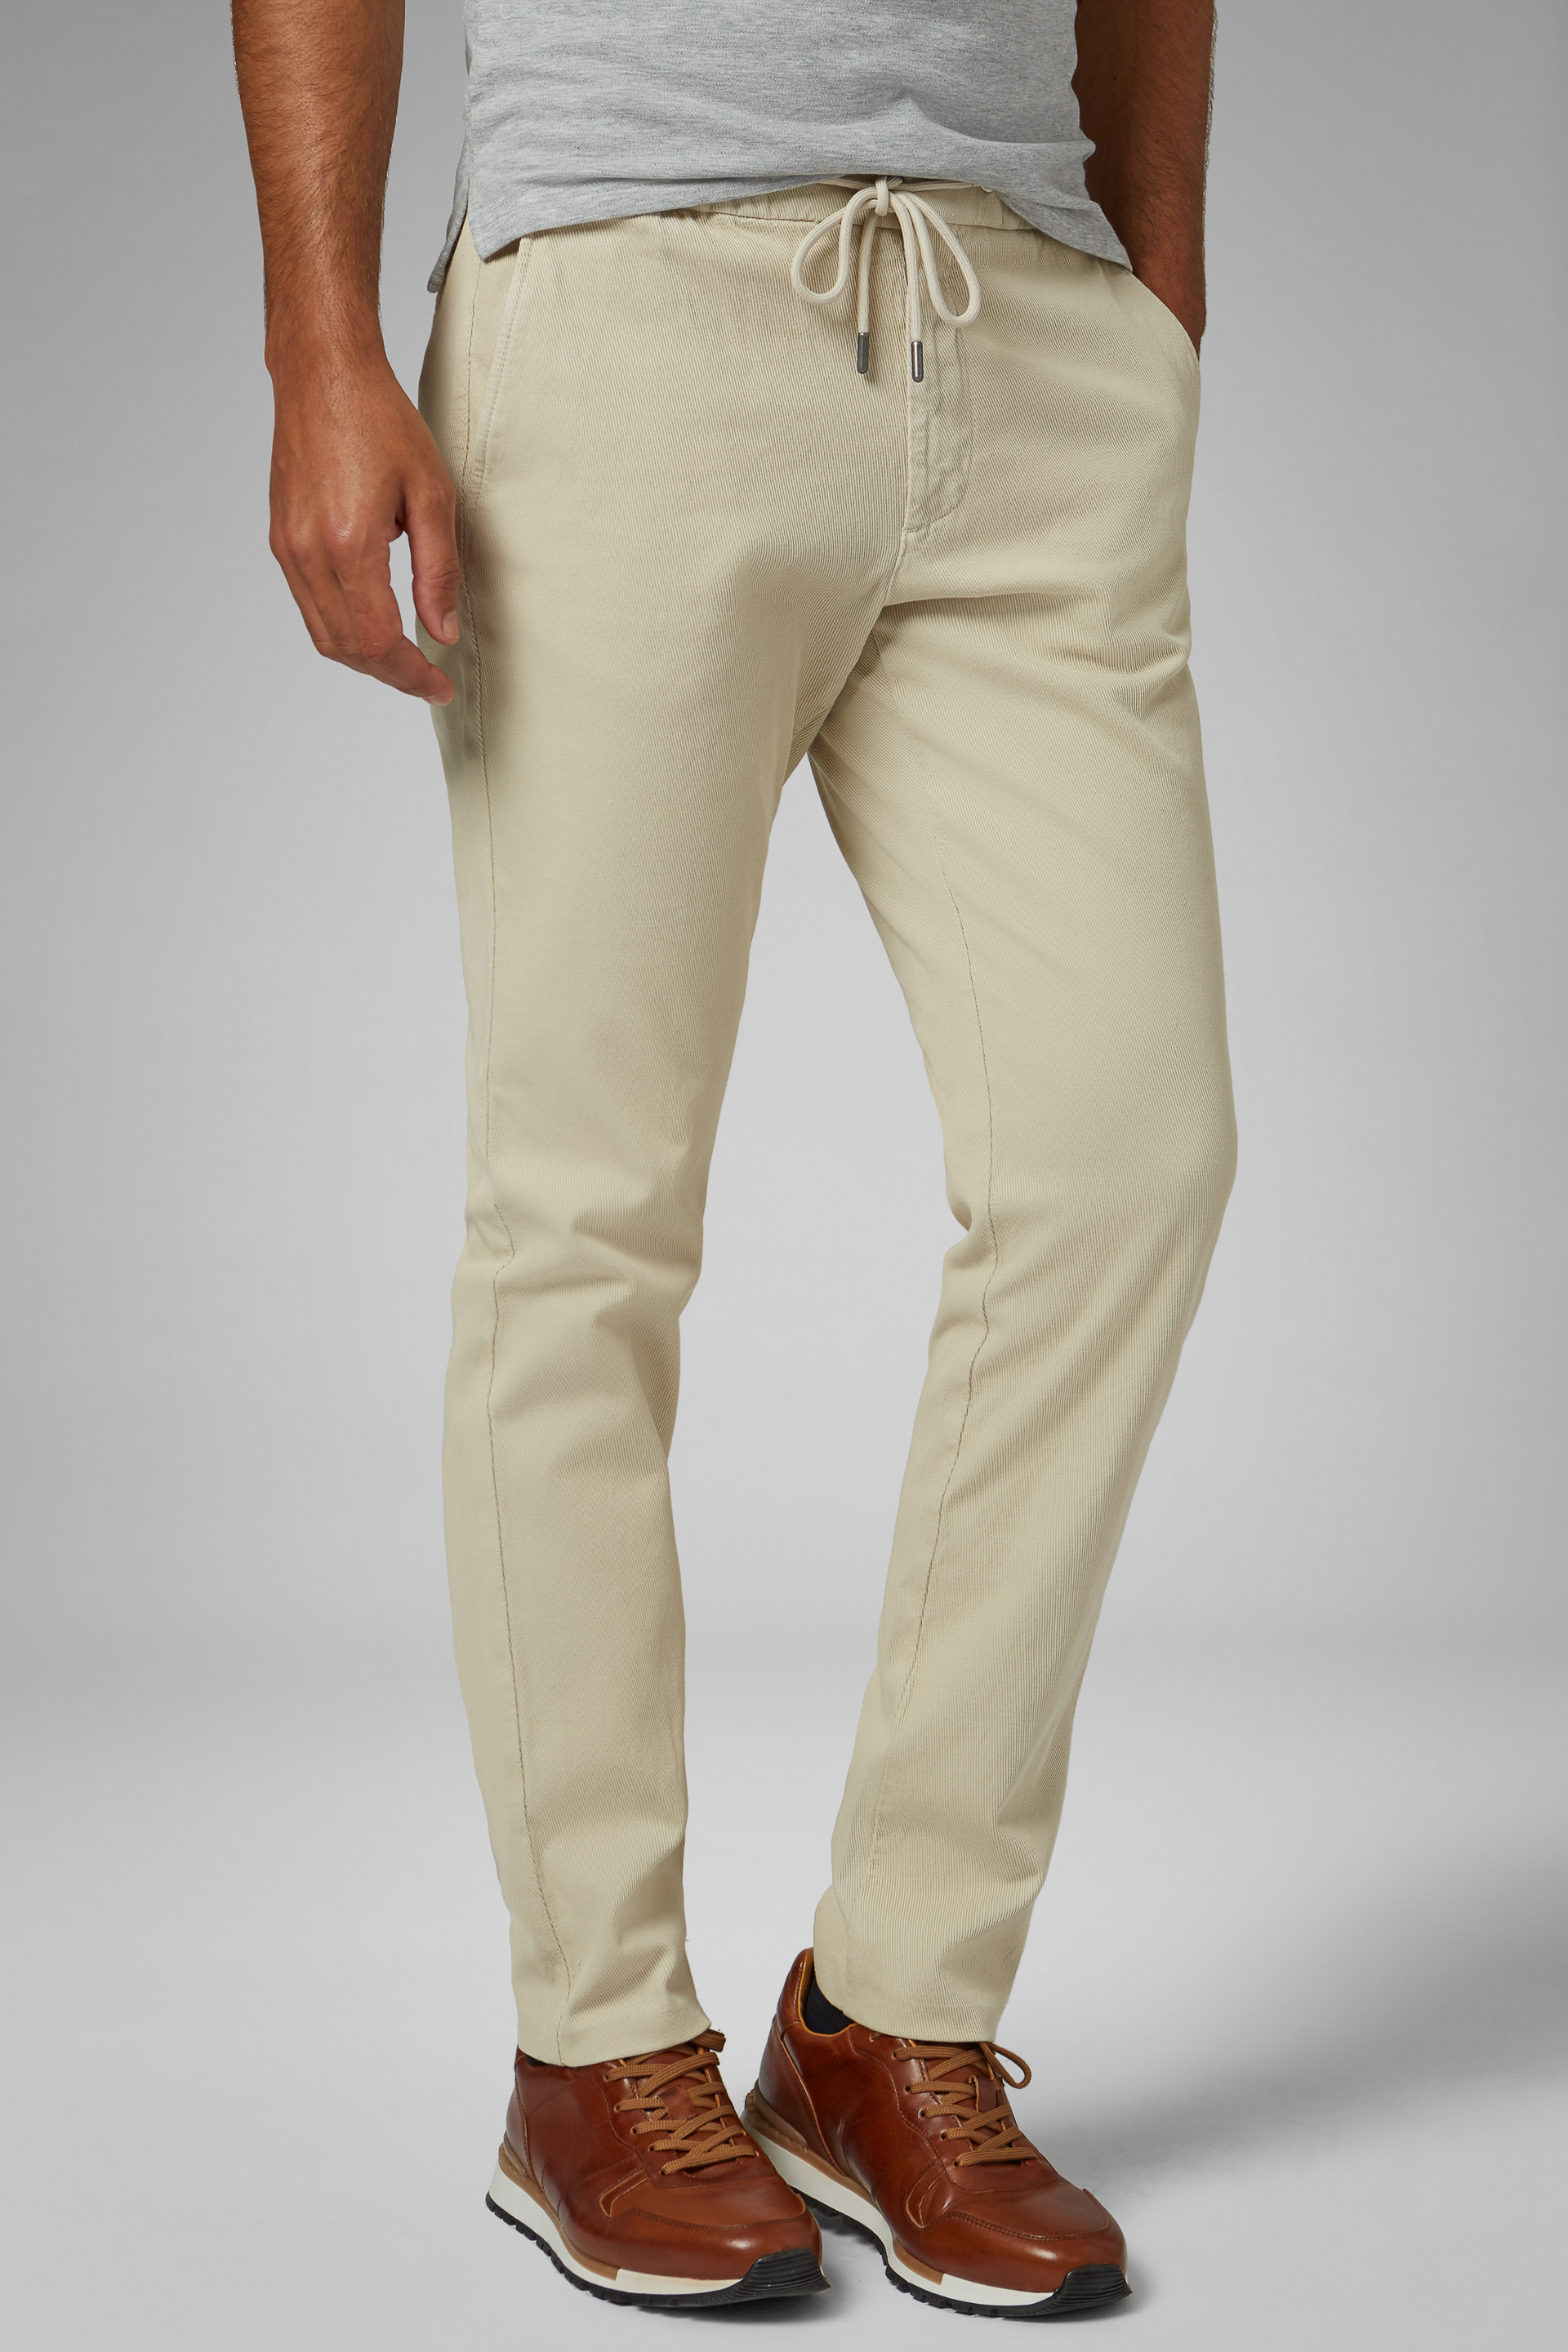 Buy INTUNE Khaki Solid Twill Peach Slim Fit Stretch Cotton Trousers   Shoppers Stop